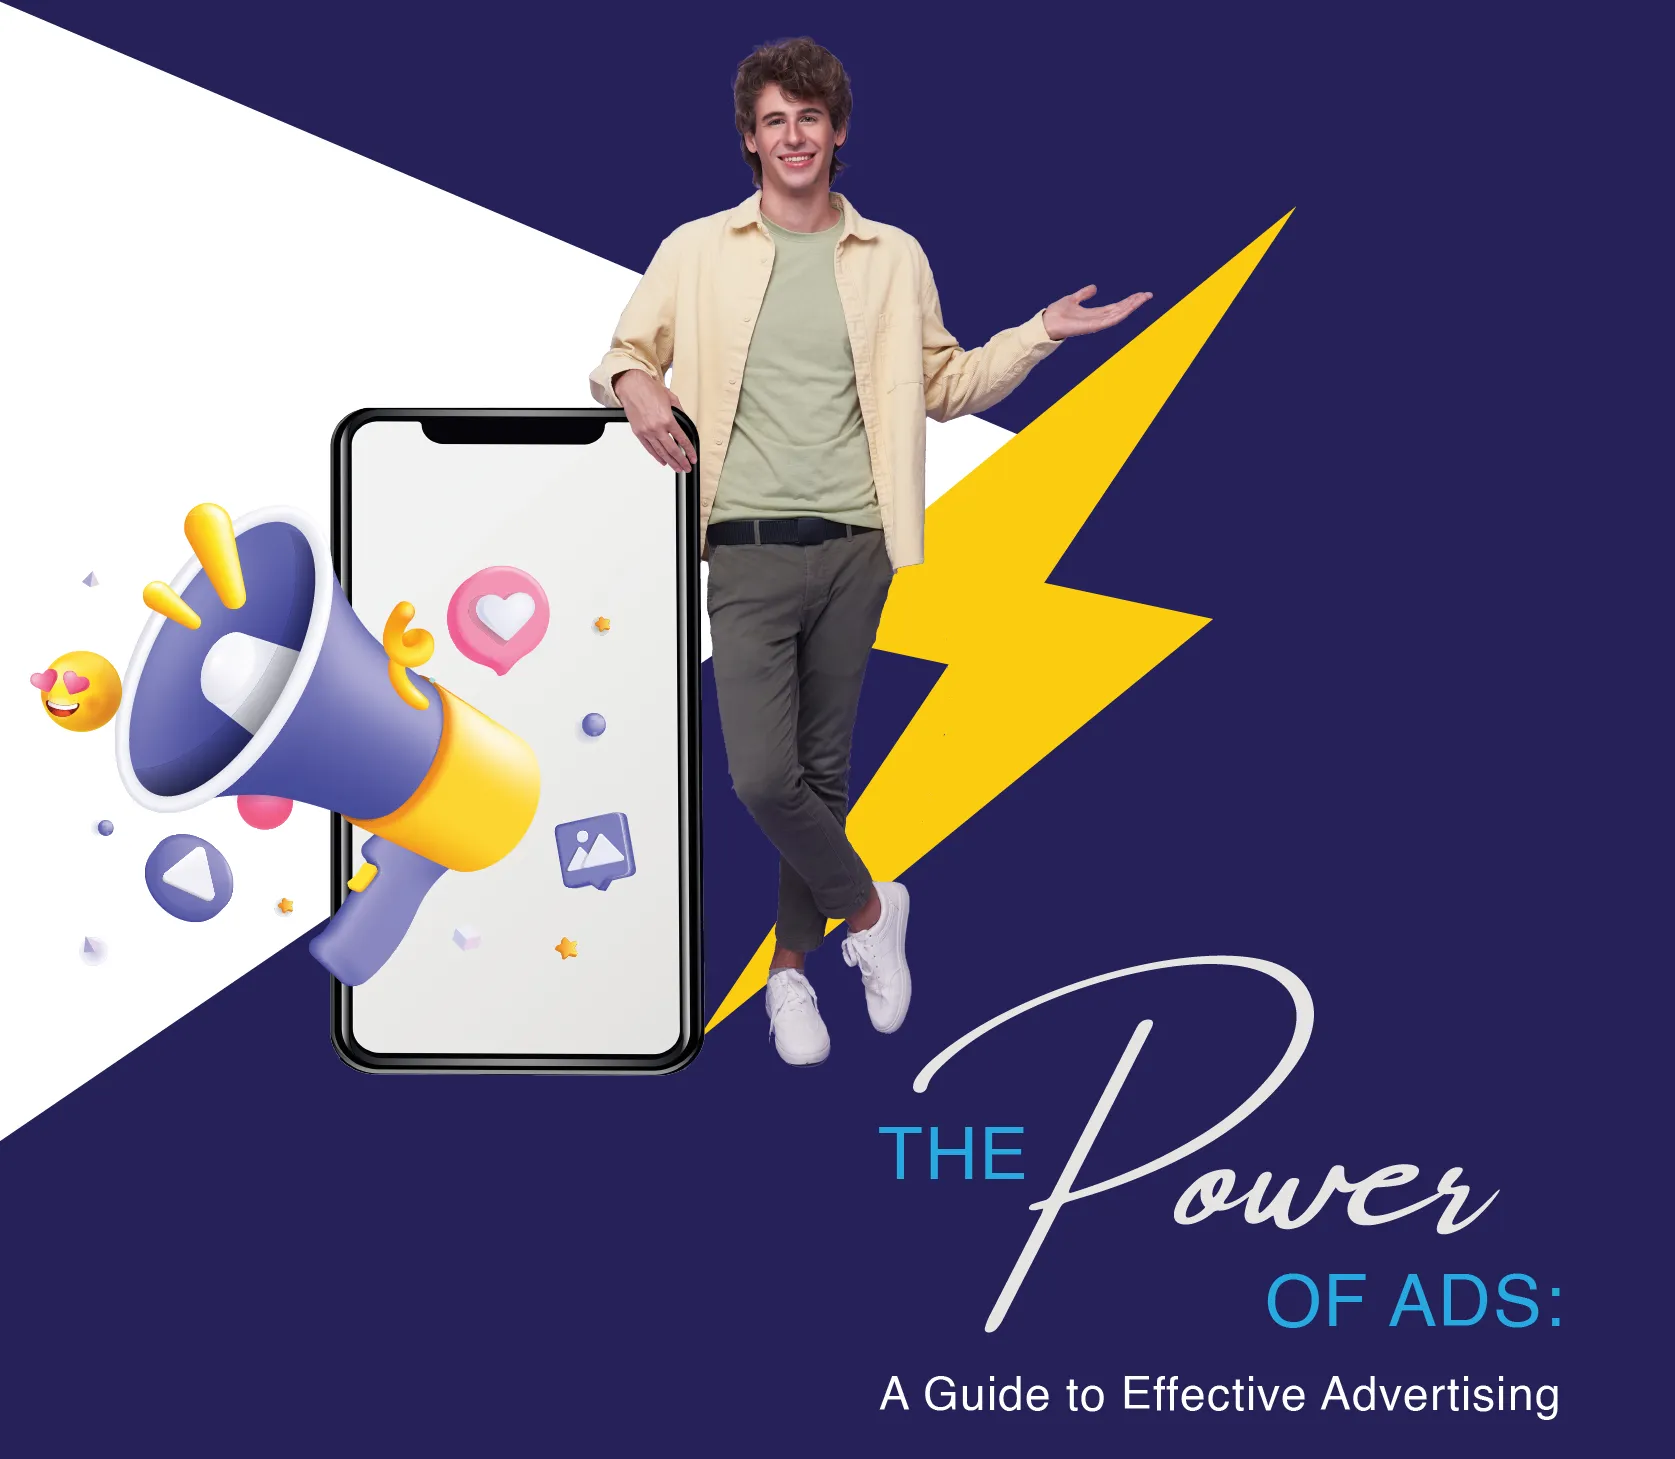 The Power of Ads: A Guide to Effective Advertising